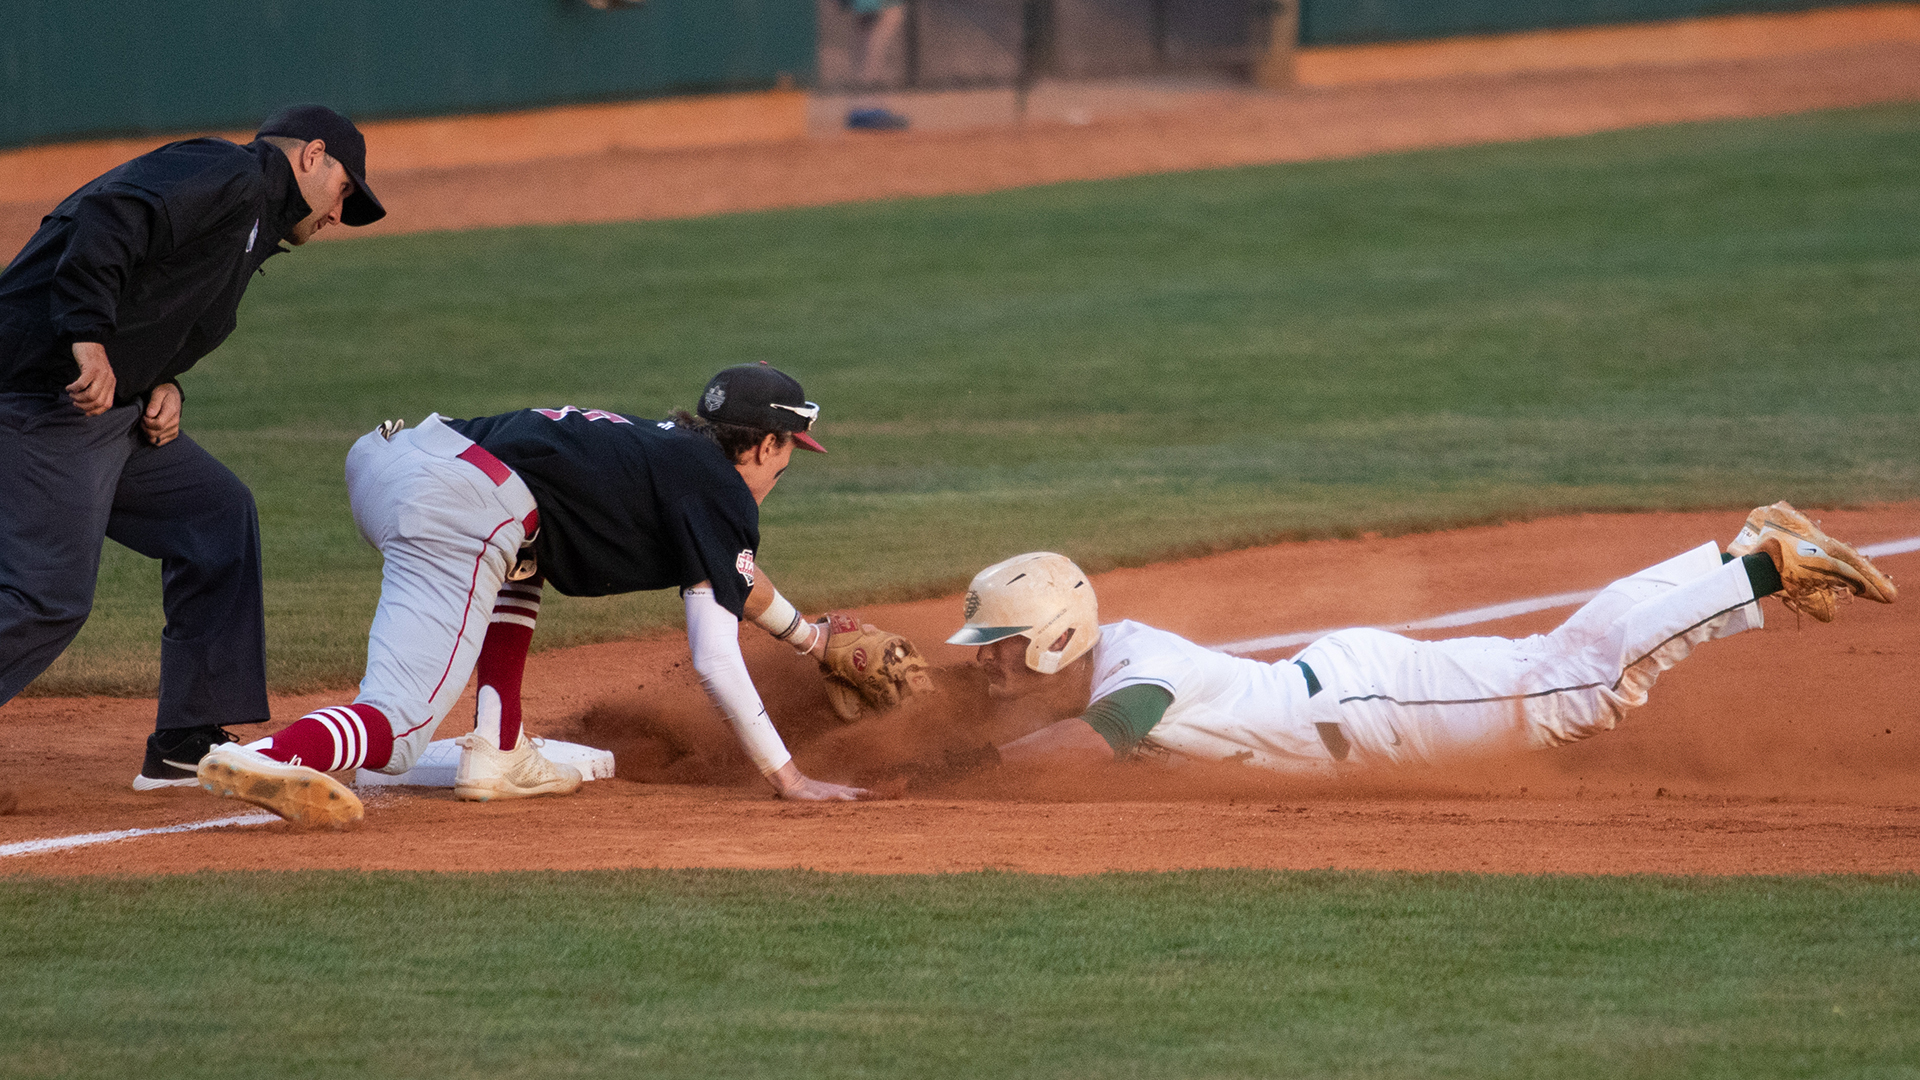 IU Southeast suffered their first loss of the Avista NAIA Baseball World Series on Sunday with a 5-2 defeat to Georgia Gwinnett. Photo by Spencer Farrin.